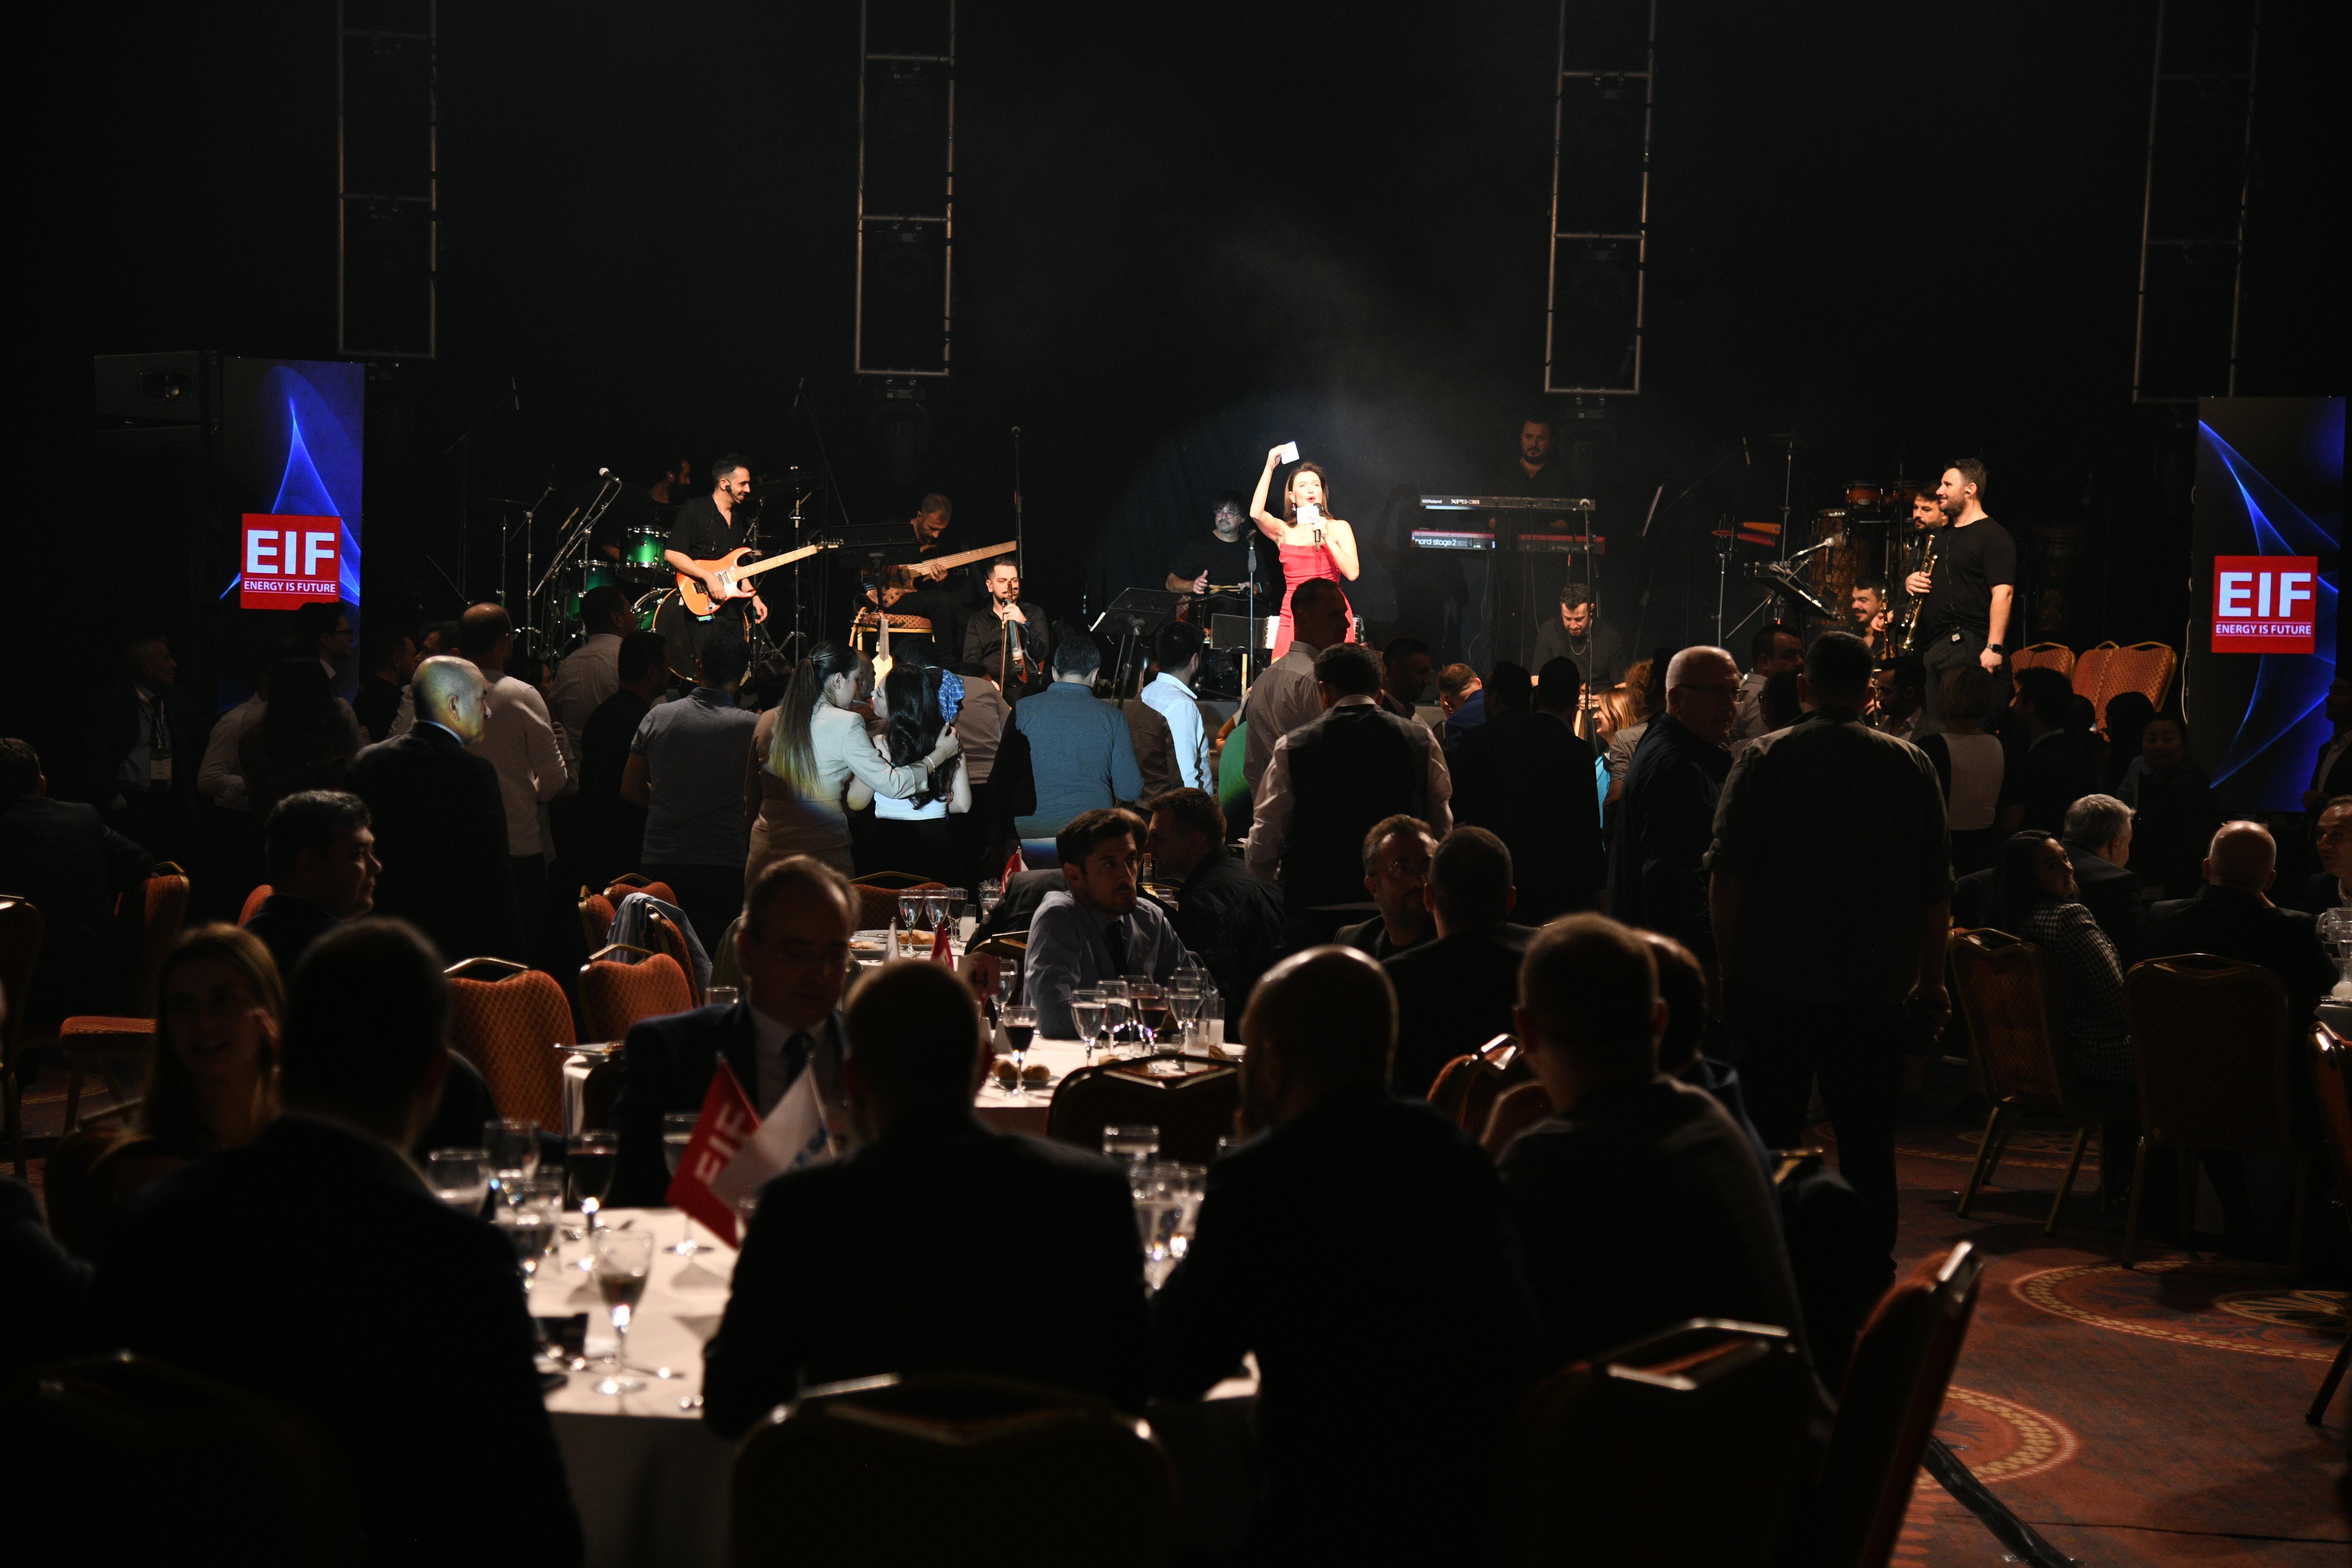 Gala gecesi-EIF World Energy Congress and Fair held its 17th anniversary celebration night with Şevval SAM